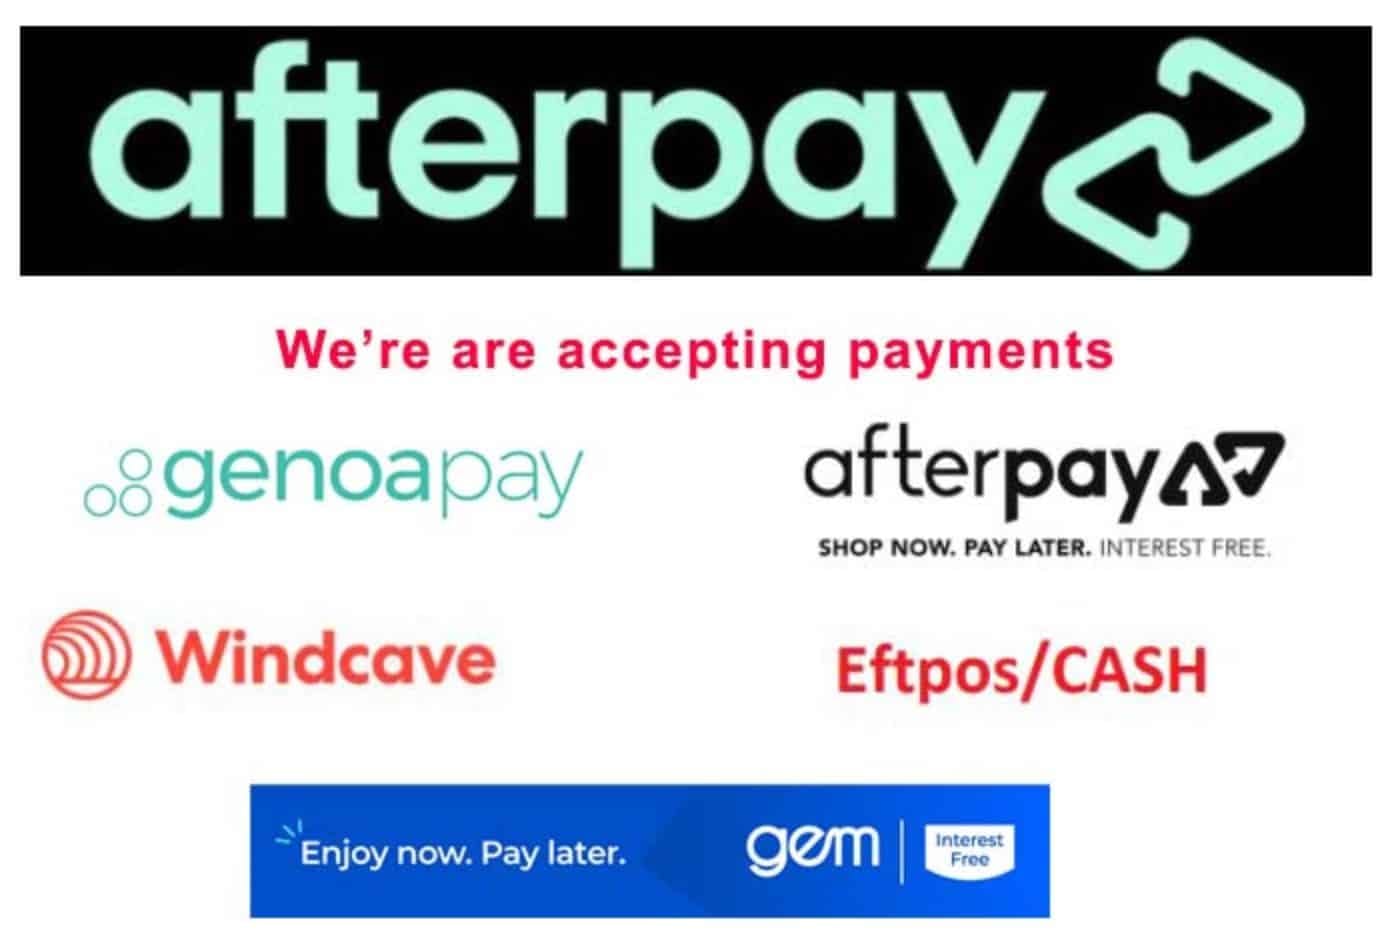 Ask Auntie - We now accept afterpay!